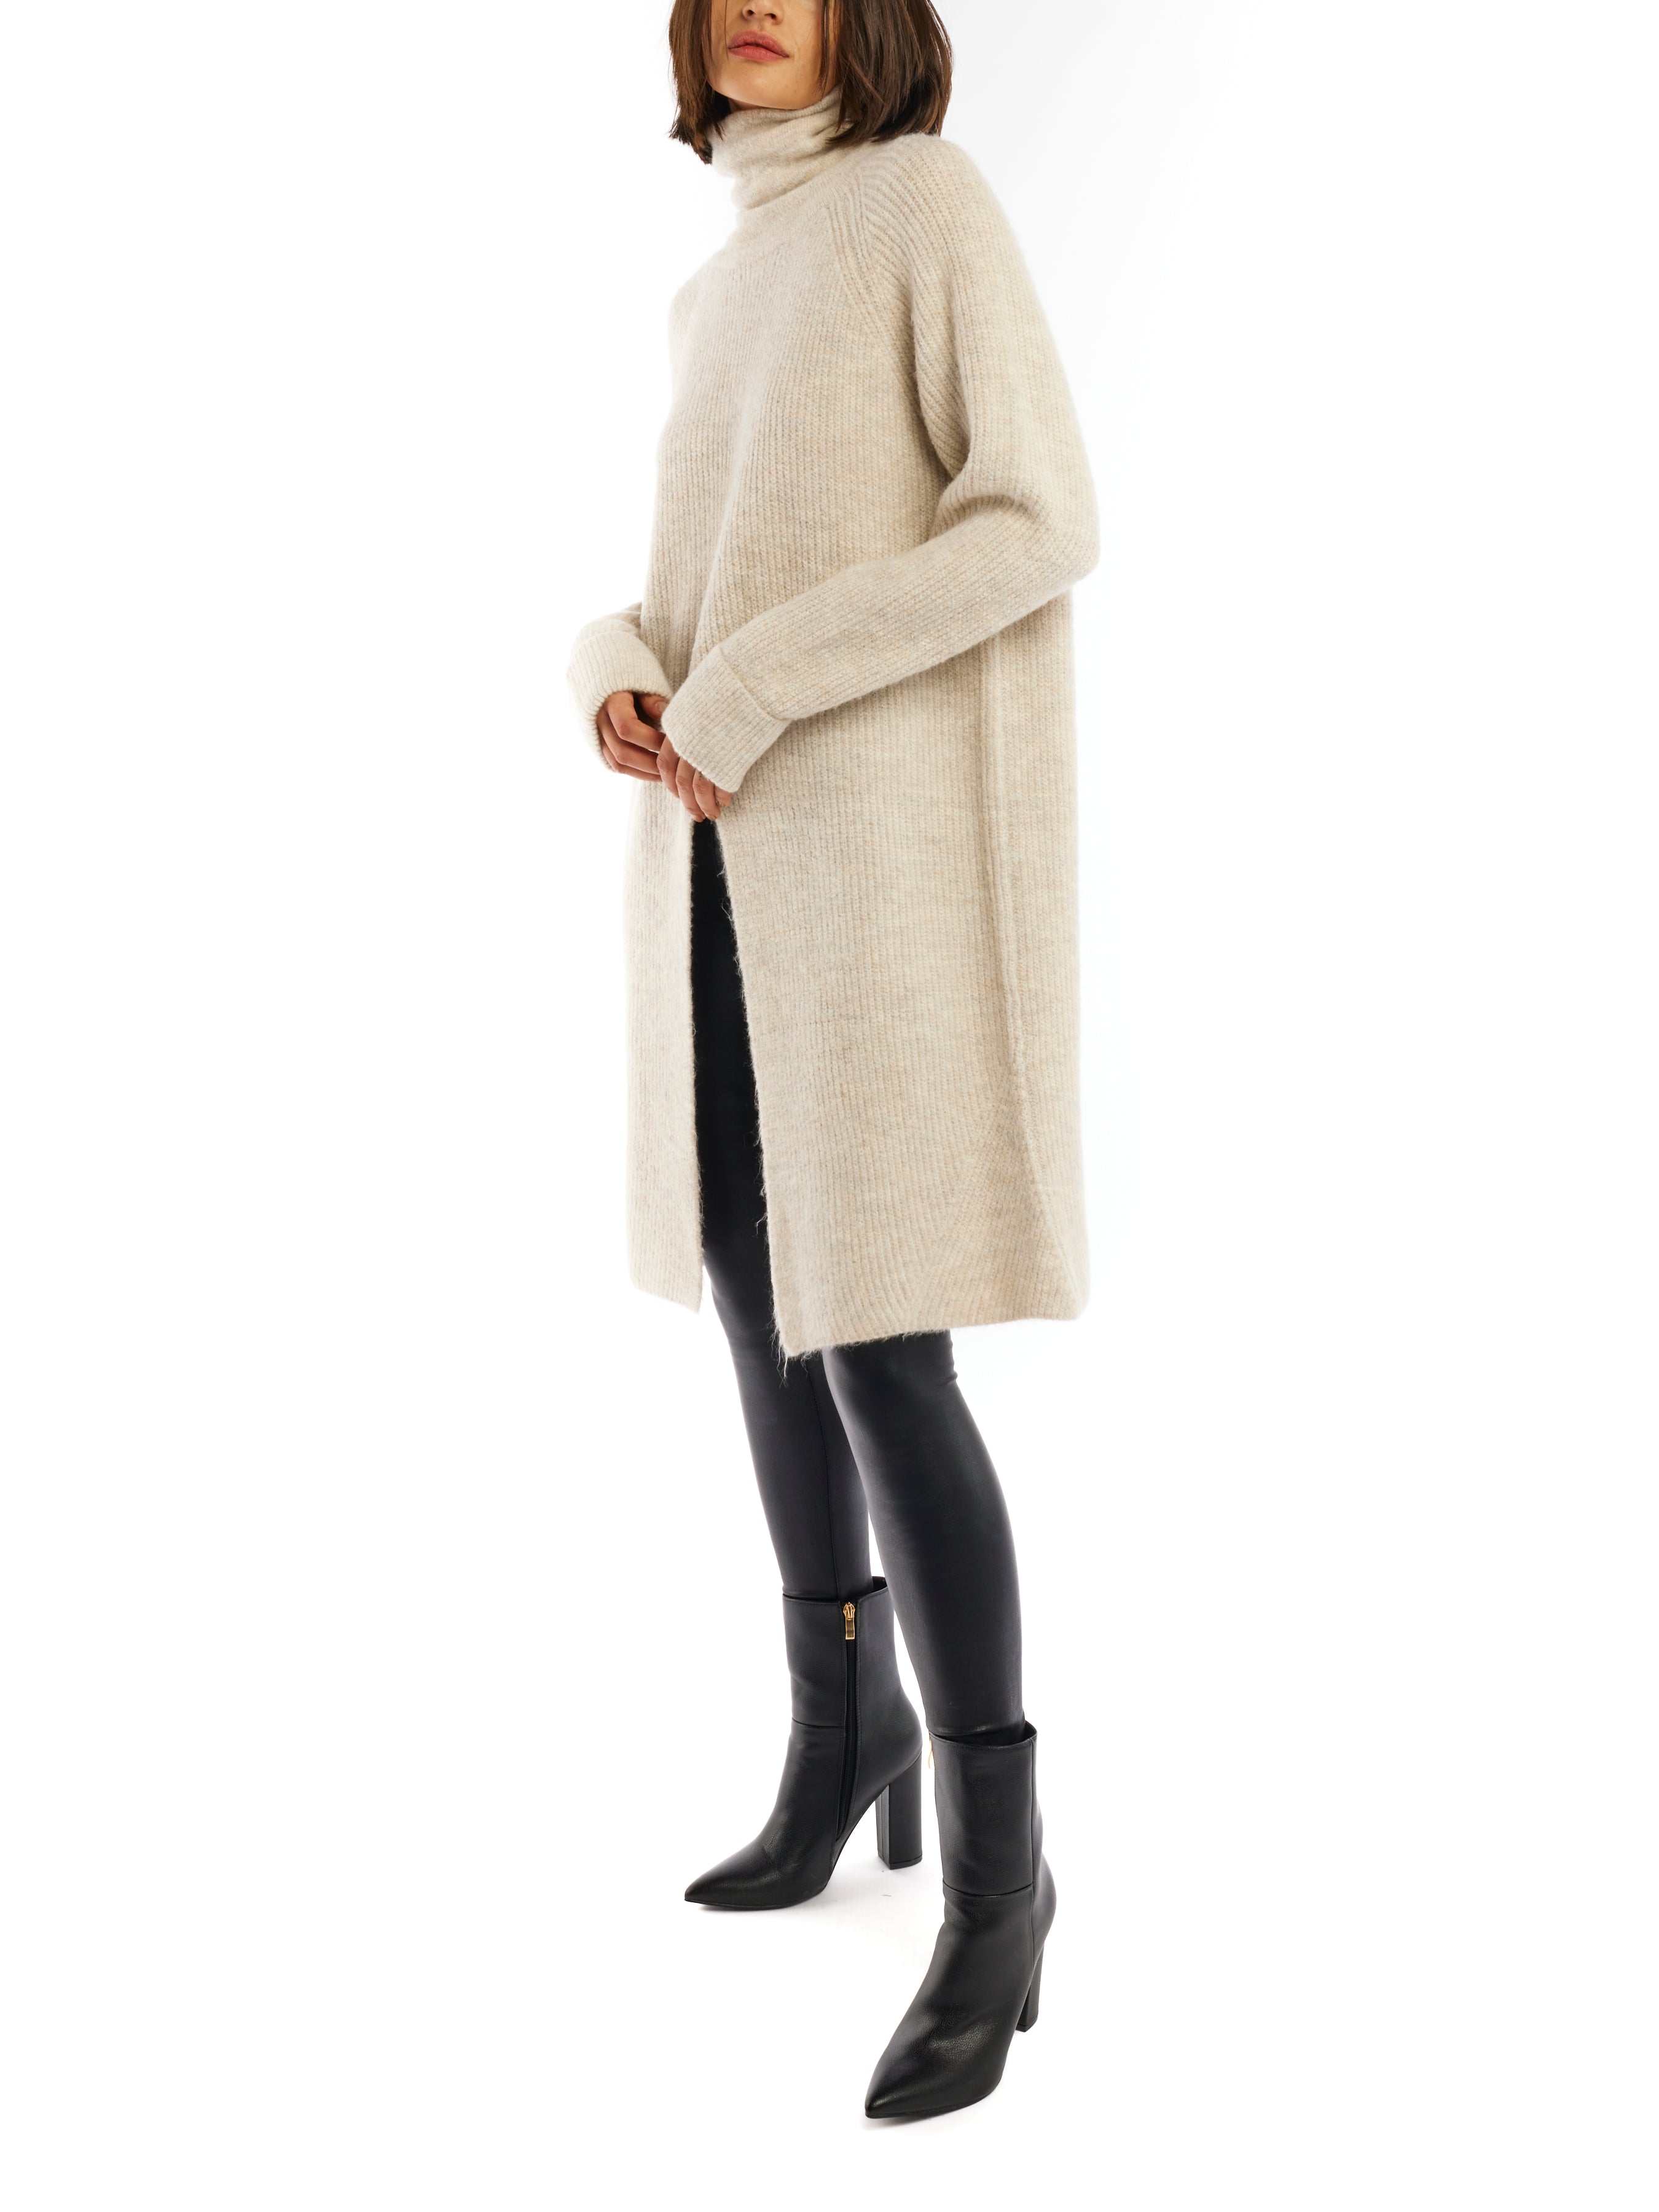 Chic turtleneck, cruelty-free knit sweater with long sleeves and slit front - side shot